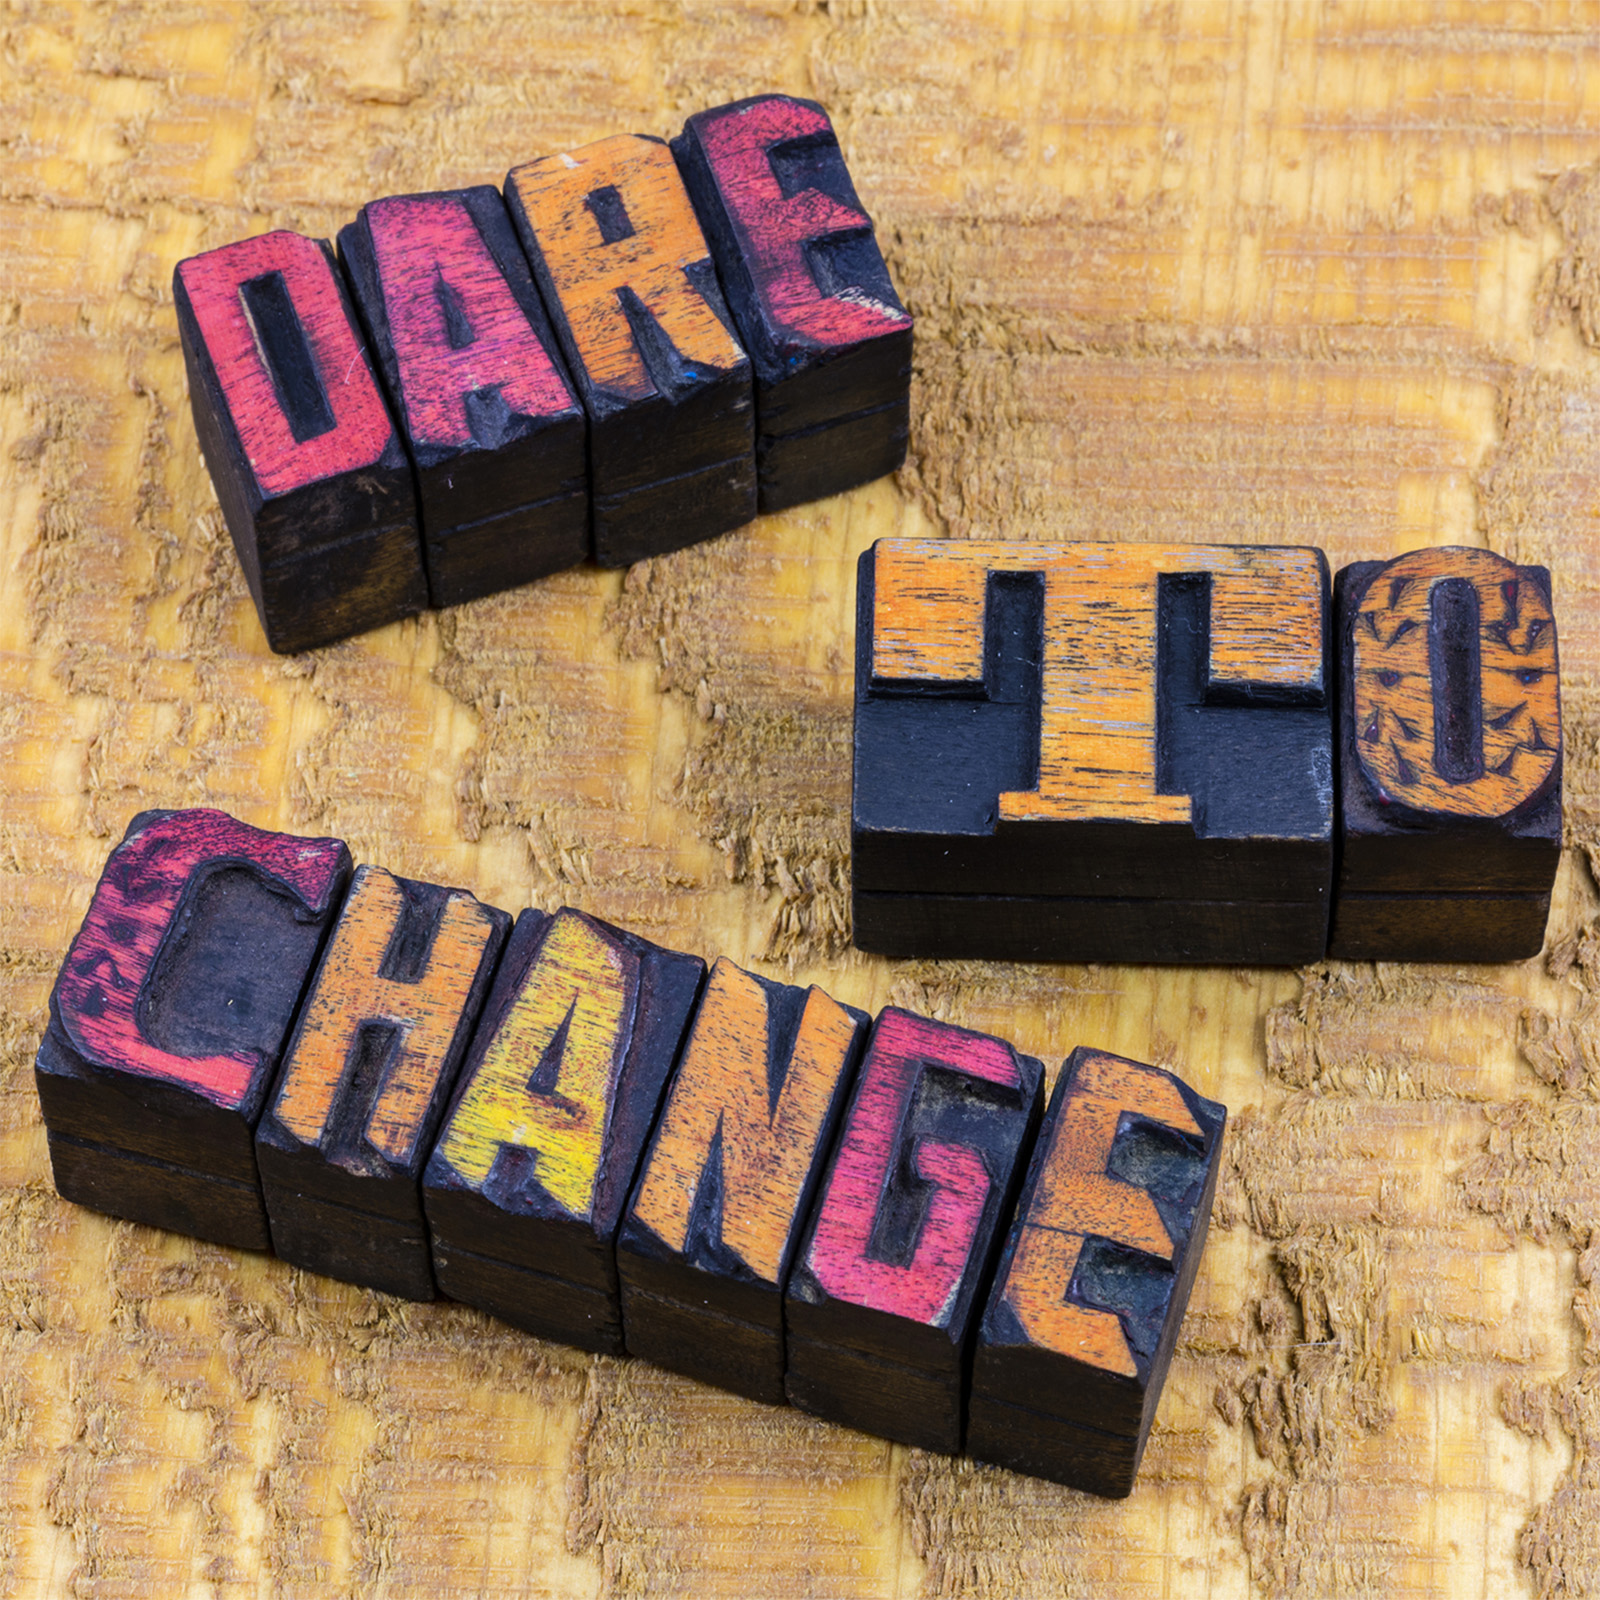 Yellow, bright pink and orange letters spelling dare to change.